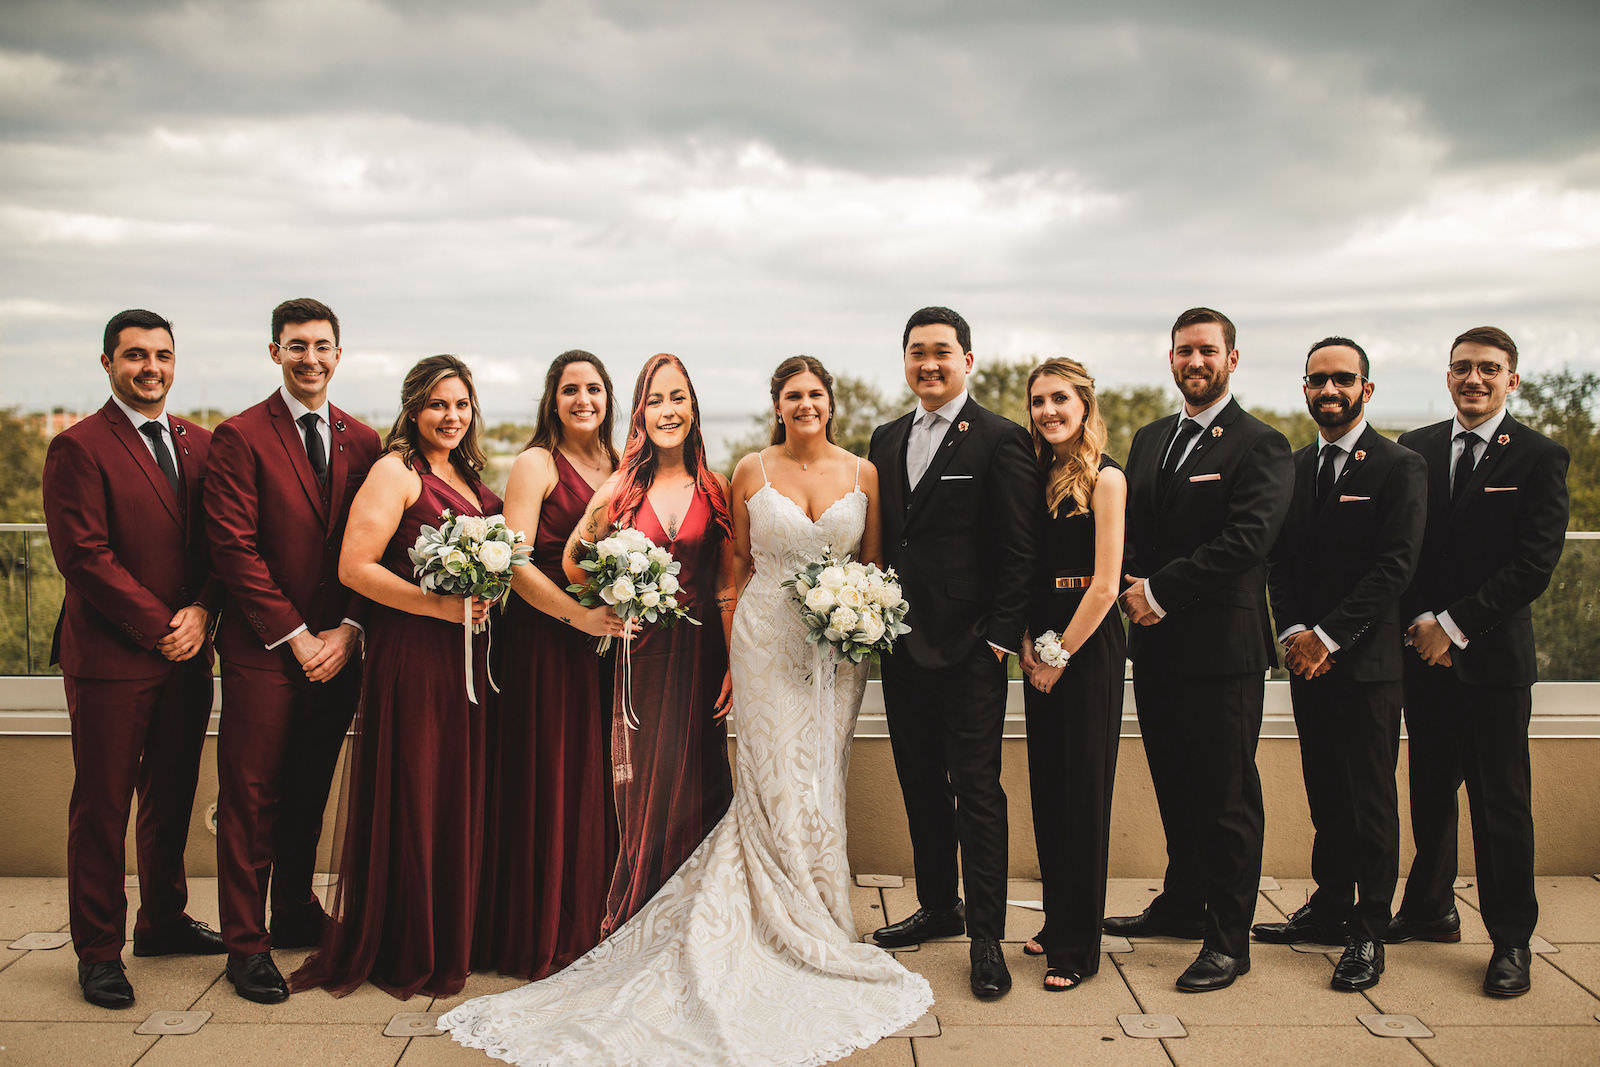 Bride in Lace Spaghetti Strap Fit and Flare Casablanca Bridal Wedding Dress, Bridesmaids in Burgundy Red Dresses, Groomsmen in Black Suits